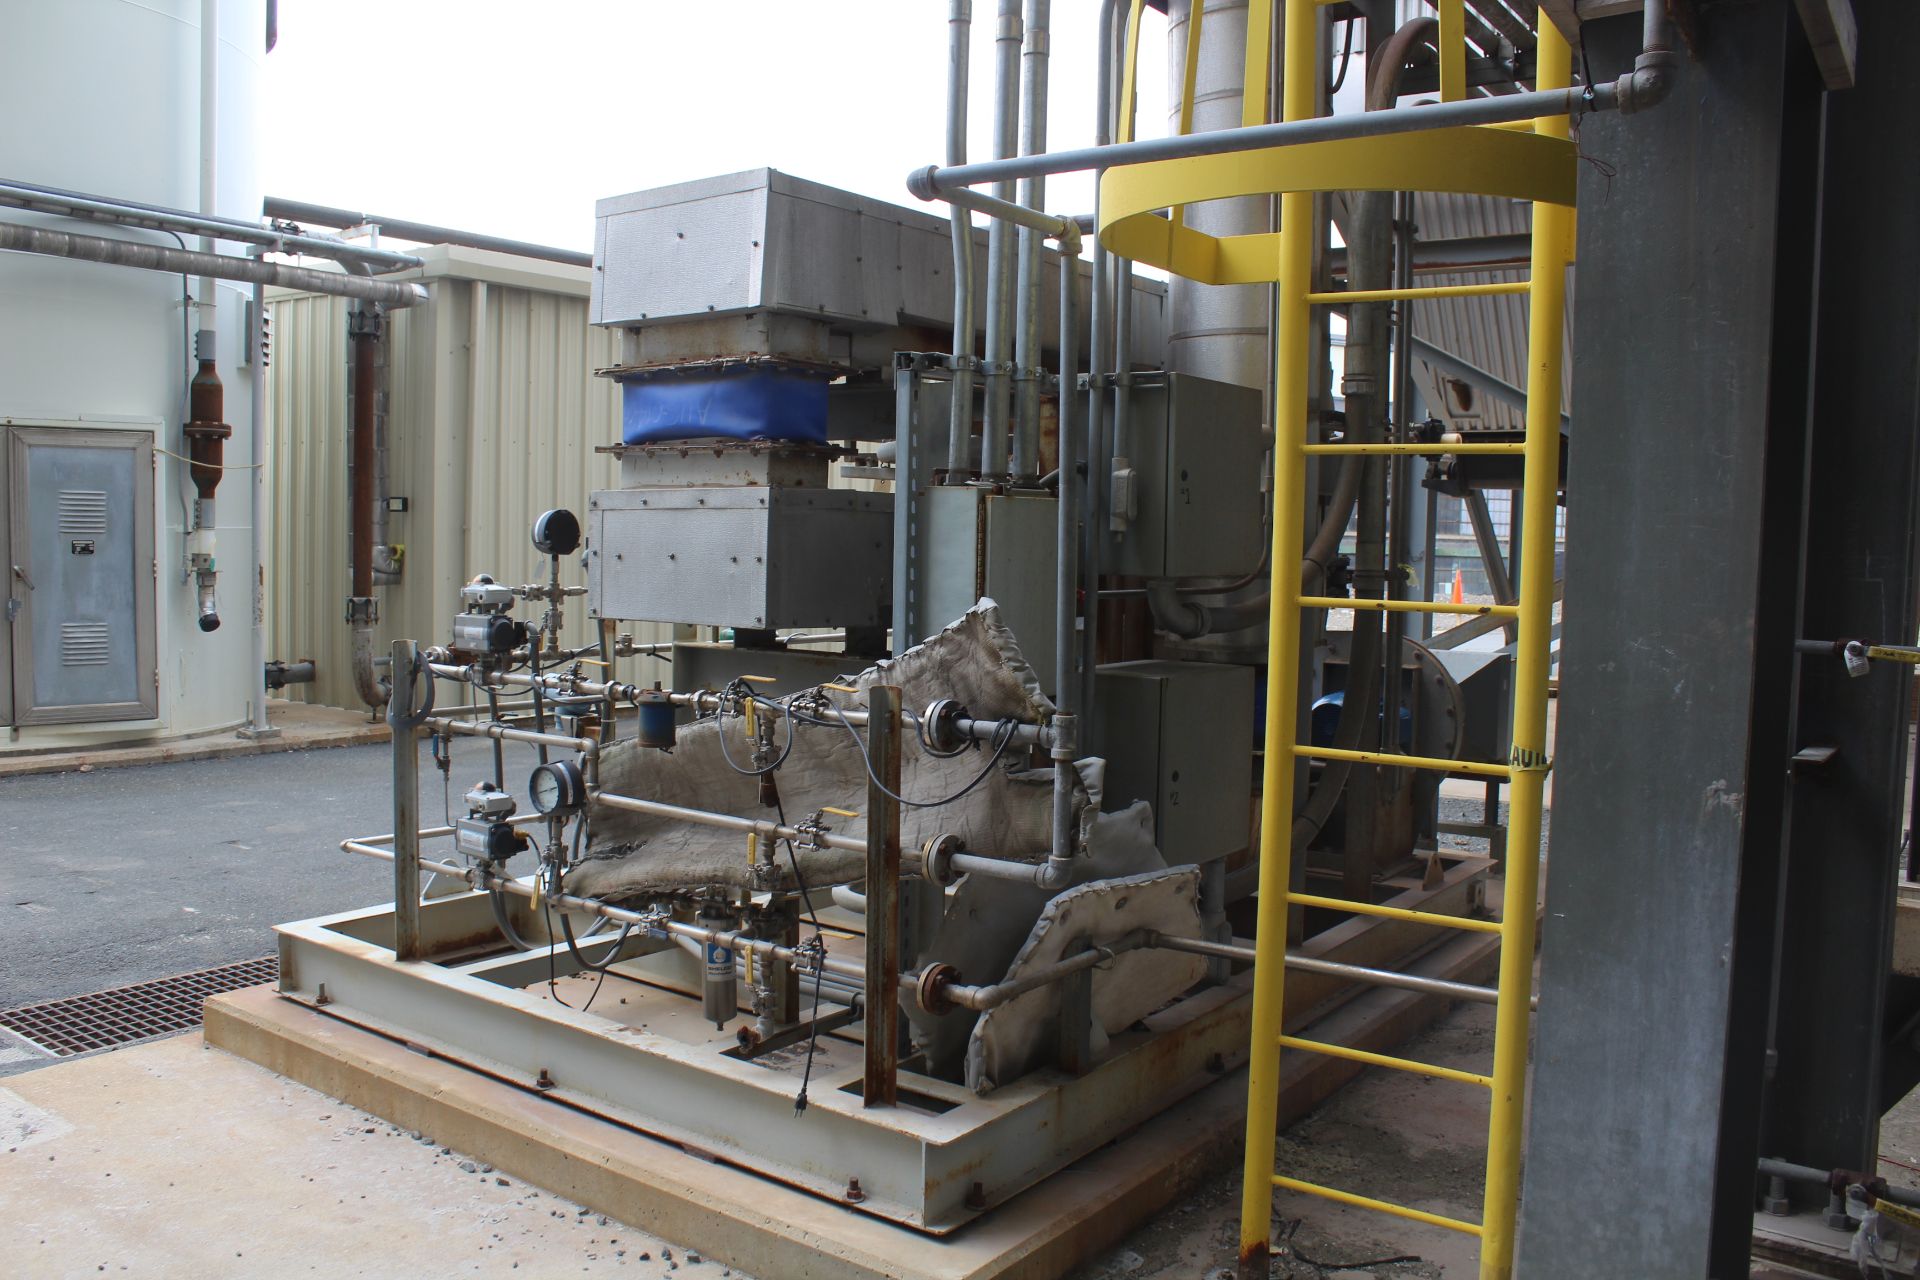 Product Dryer Skid | Rig Fee: $500 - Image 4 of 4